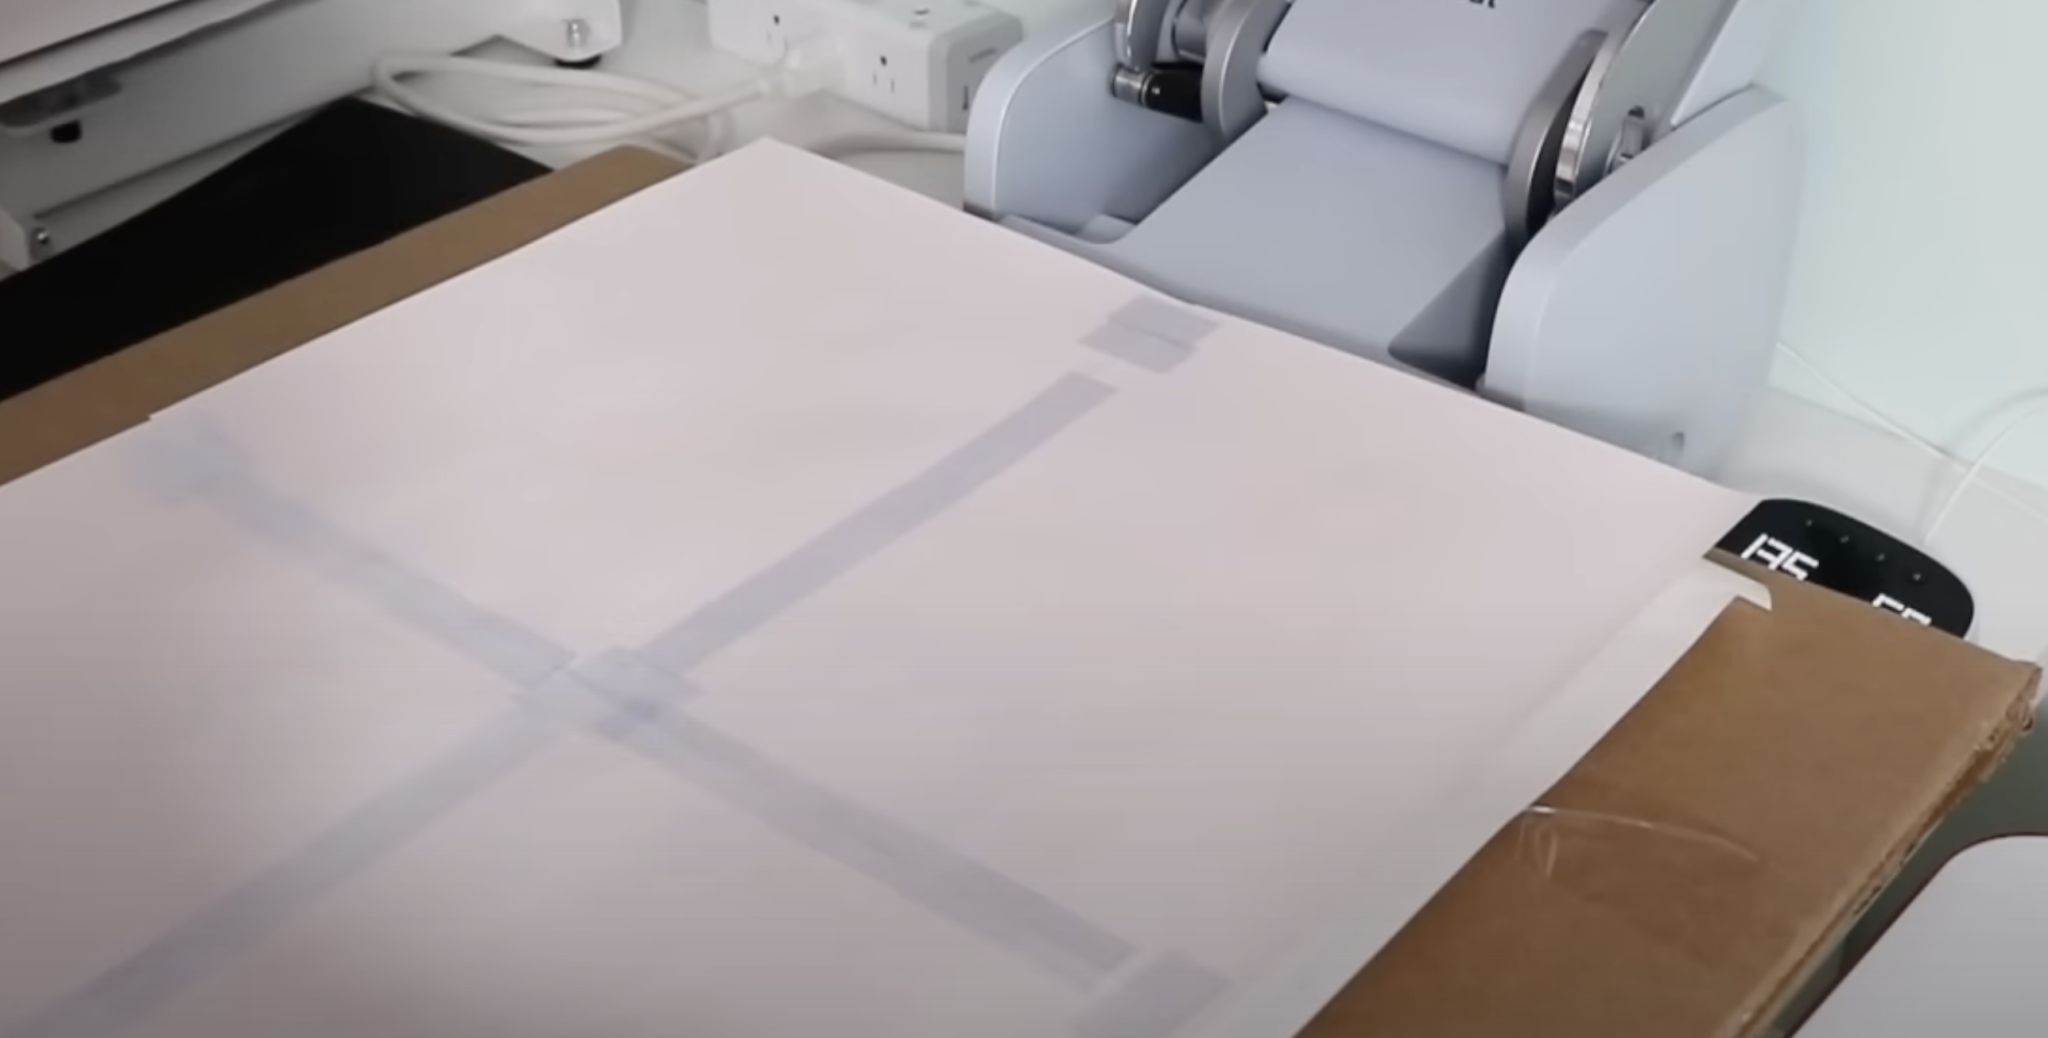 Add large sublimation print to heat press.